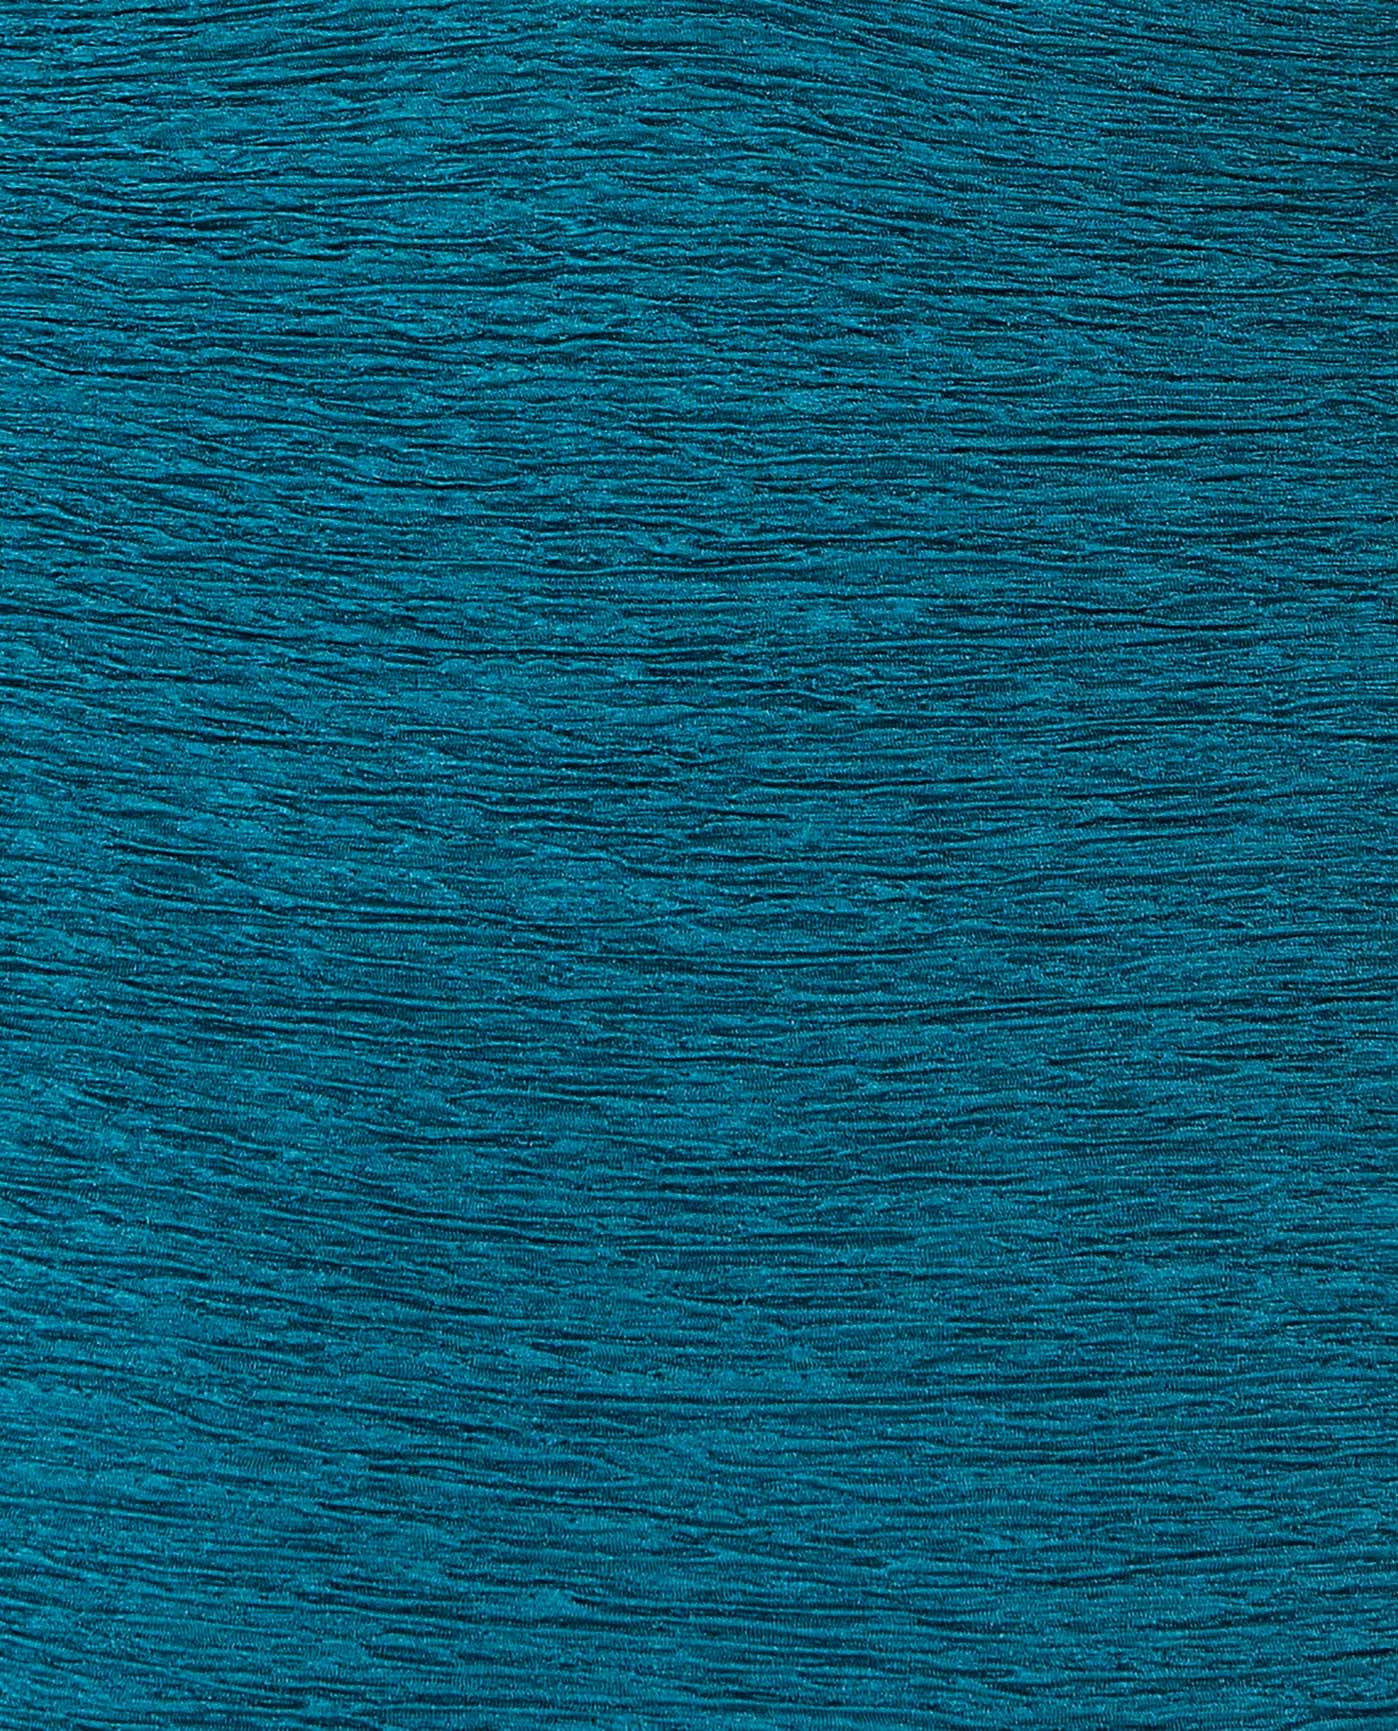 FABRIC SWATCH VIEW OF CHLORINE RESISTANT KRINKLE TEXTURED COLOR BLOCK TWIST FRONT ONE PIECE | KRINKLE COSMO BLUE